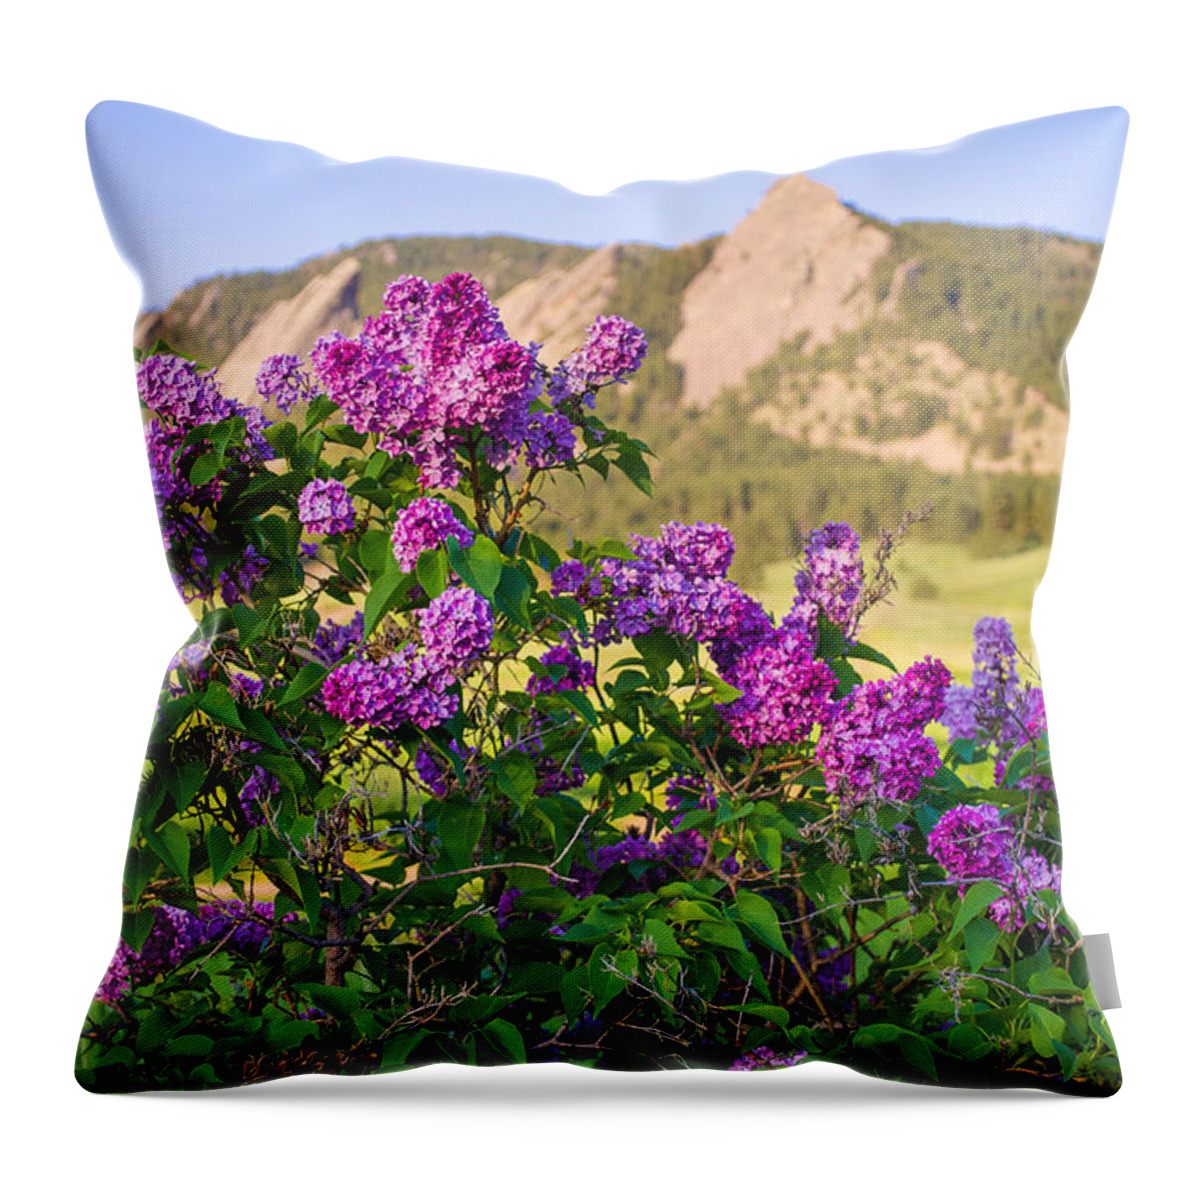 Lilac Throw Pillow featuring the photograph Lilac Flowers - Boulder Colorado by Aaron Spong